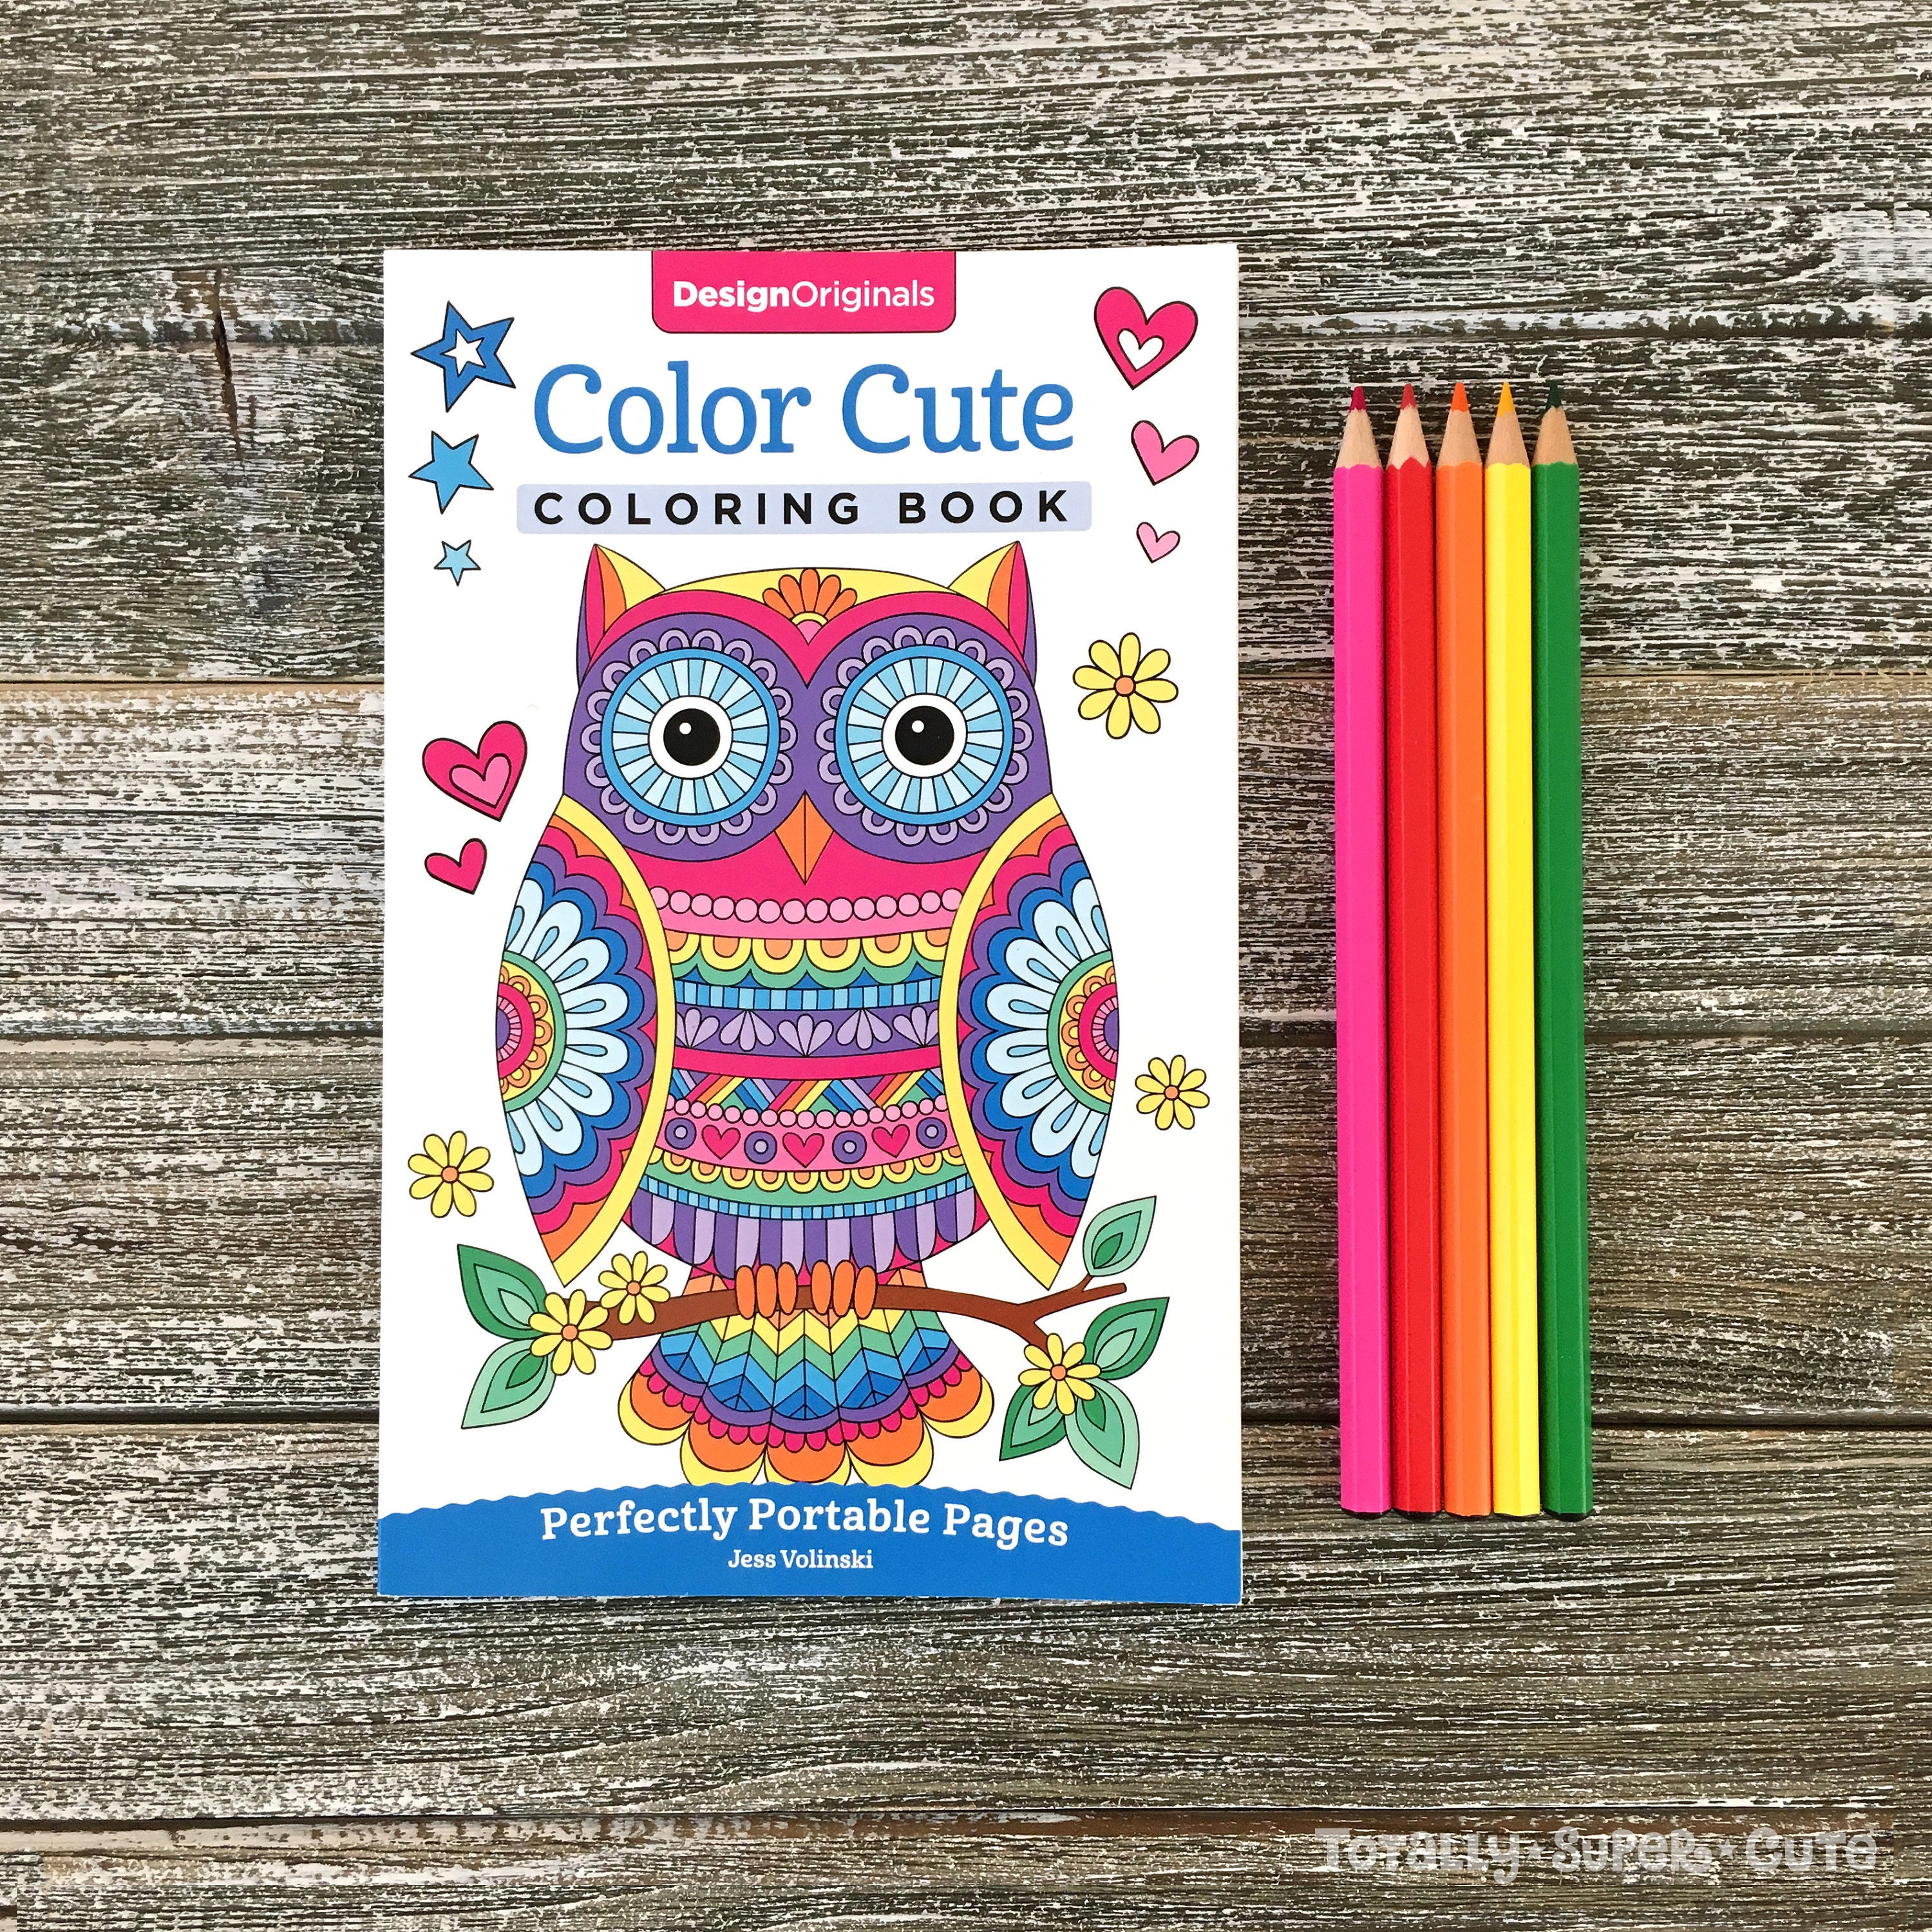 Color Cute Coloring Book: Perfectly Portable Pages [Book]